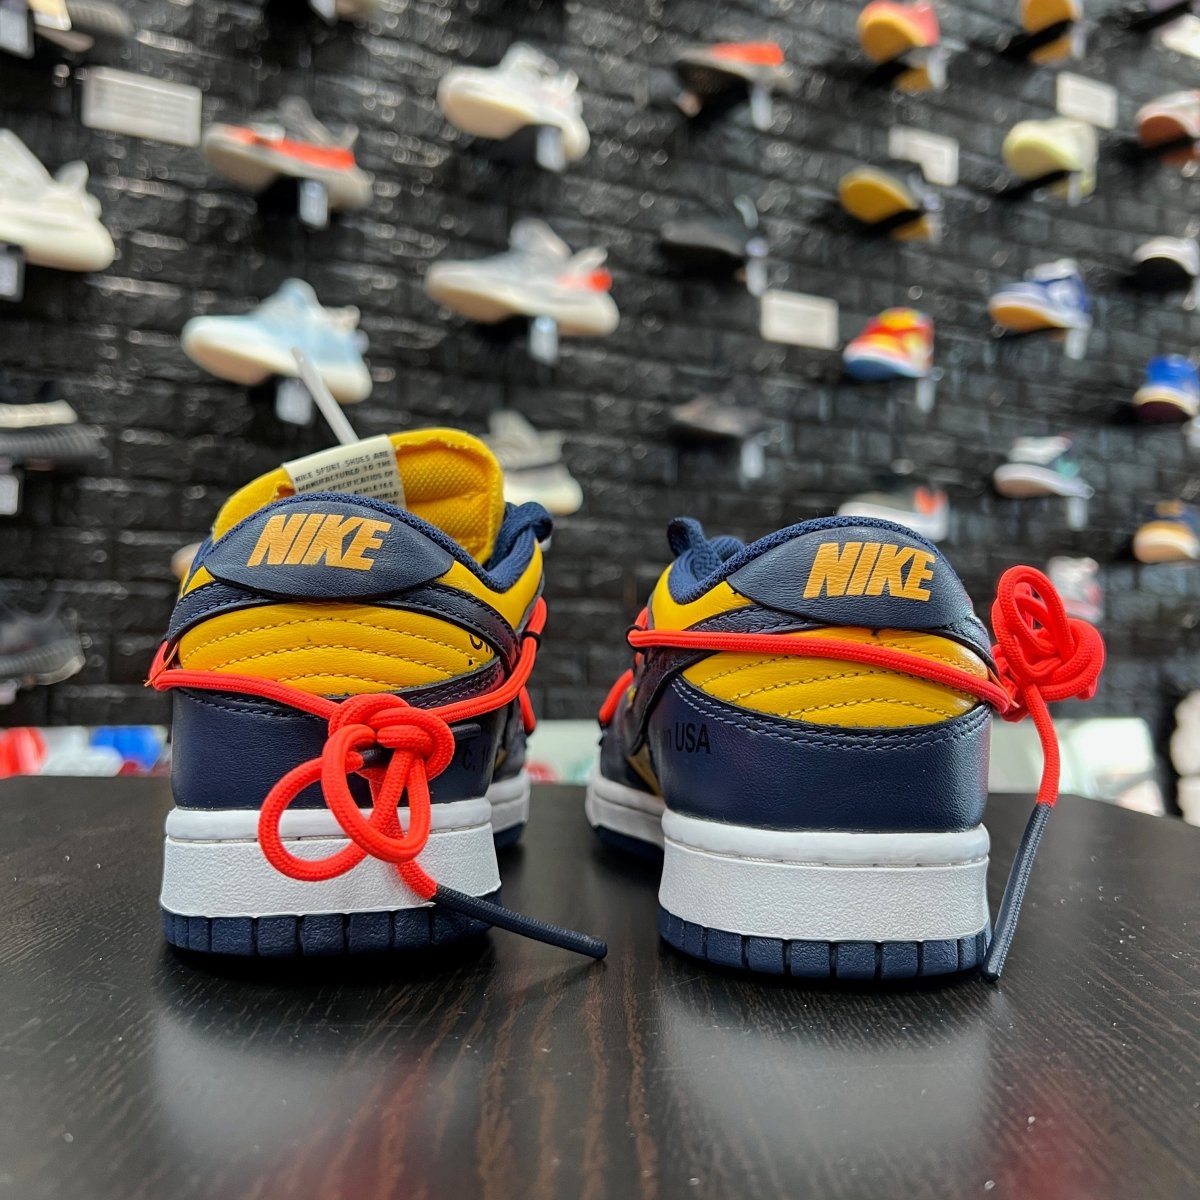 Off-White x Dunk Low 'University Gold' - Gently Enjoyed (Used) Men 7 - sneaker - Low Sneaker - Dunks - Jawns on Fire